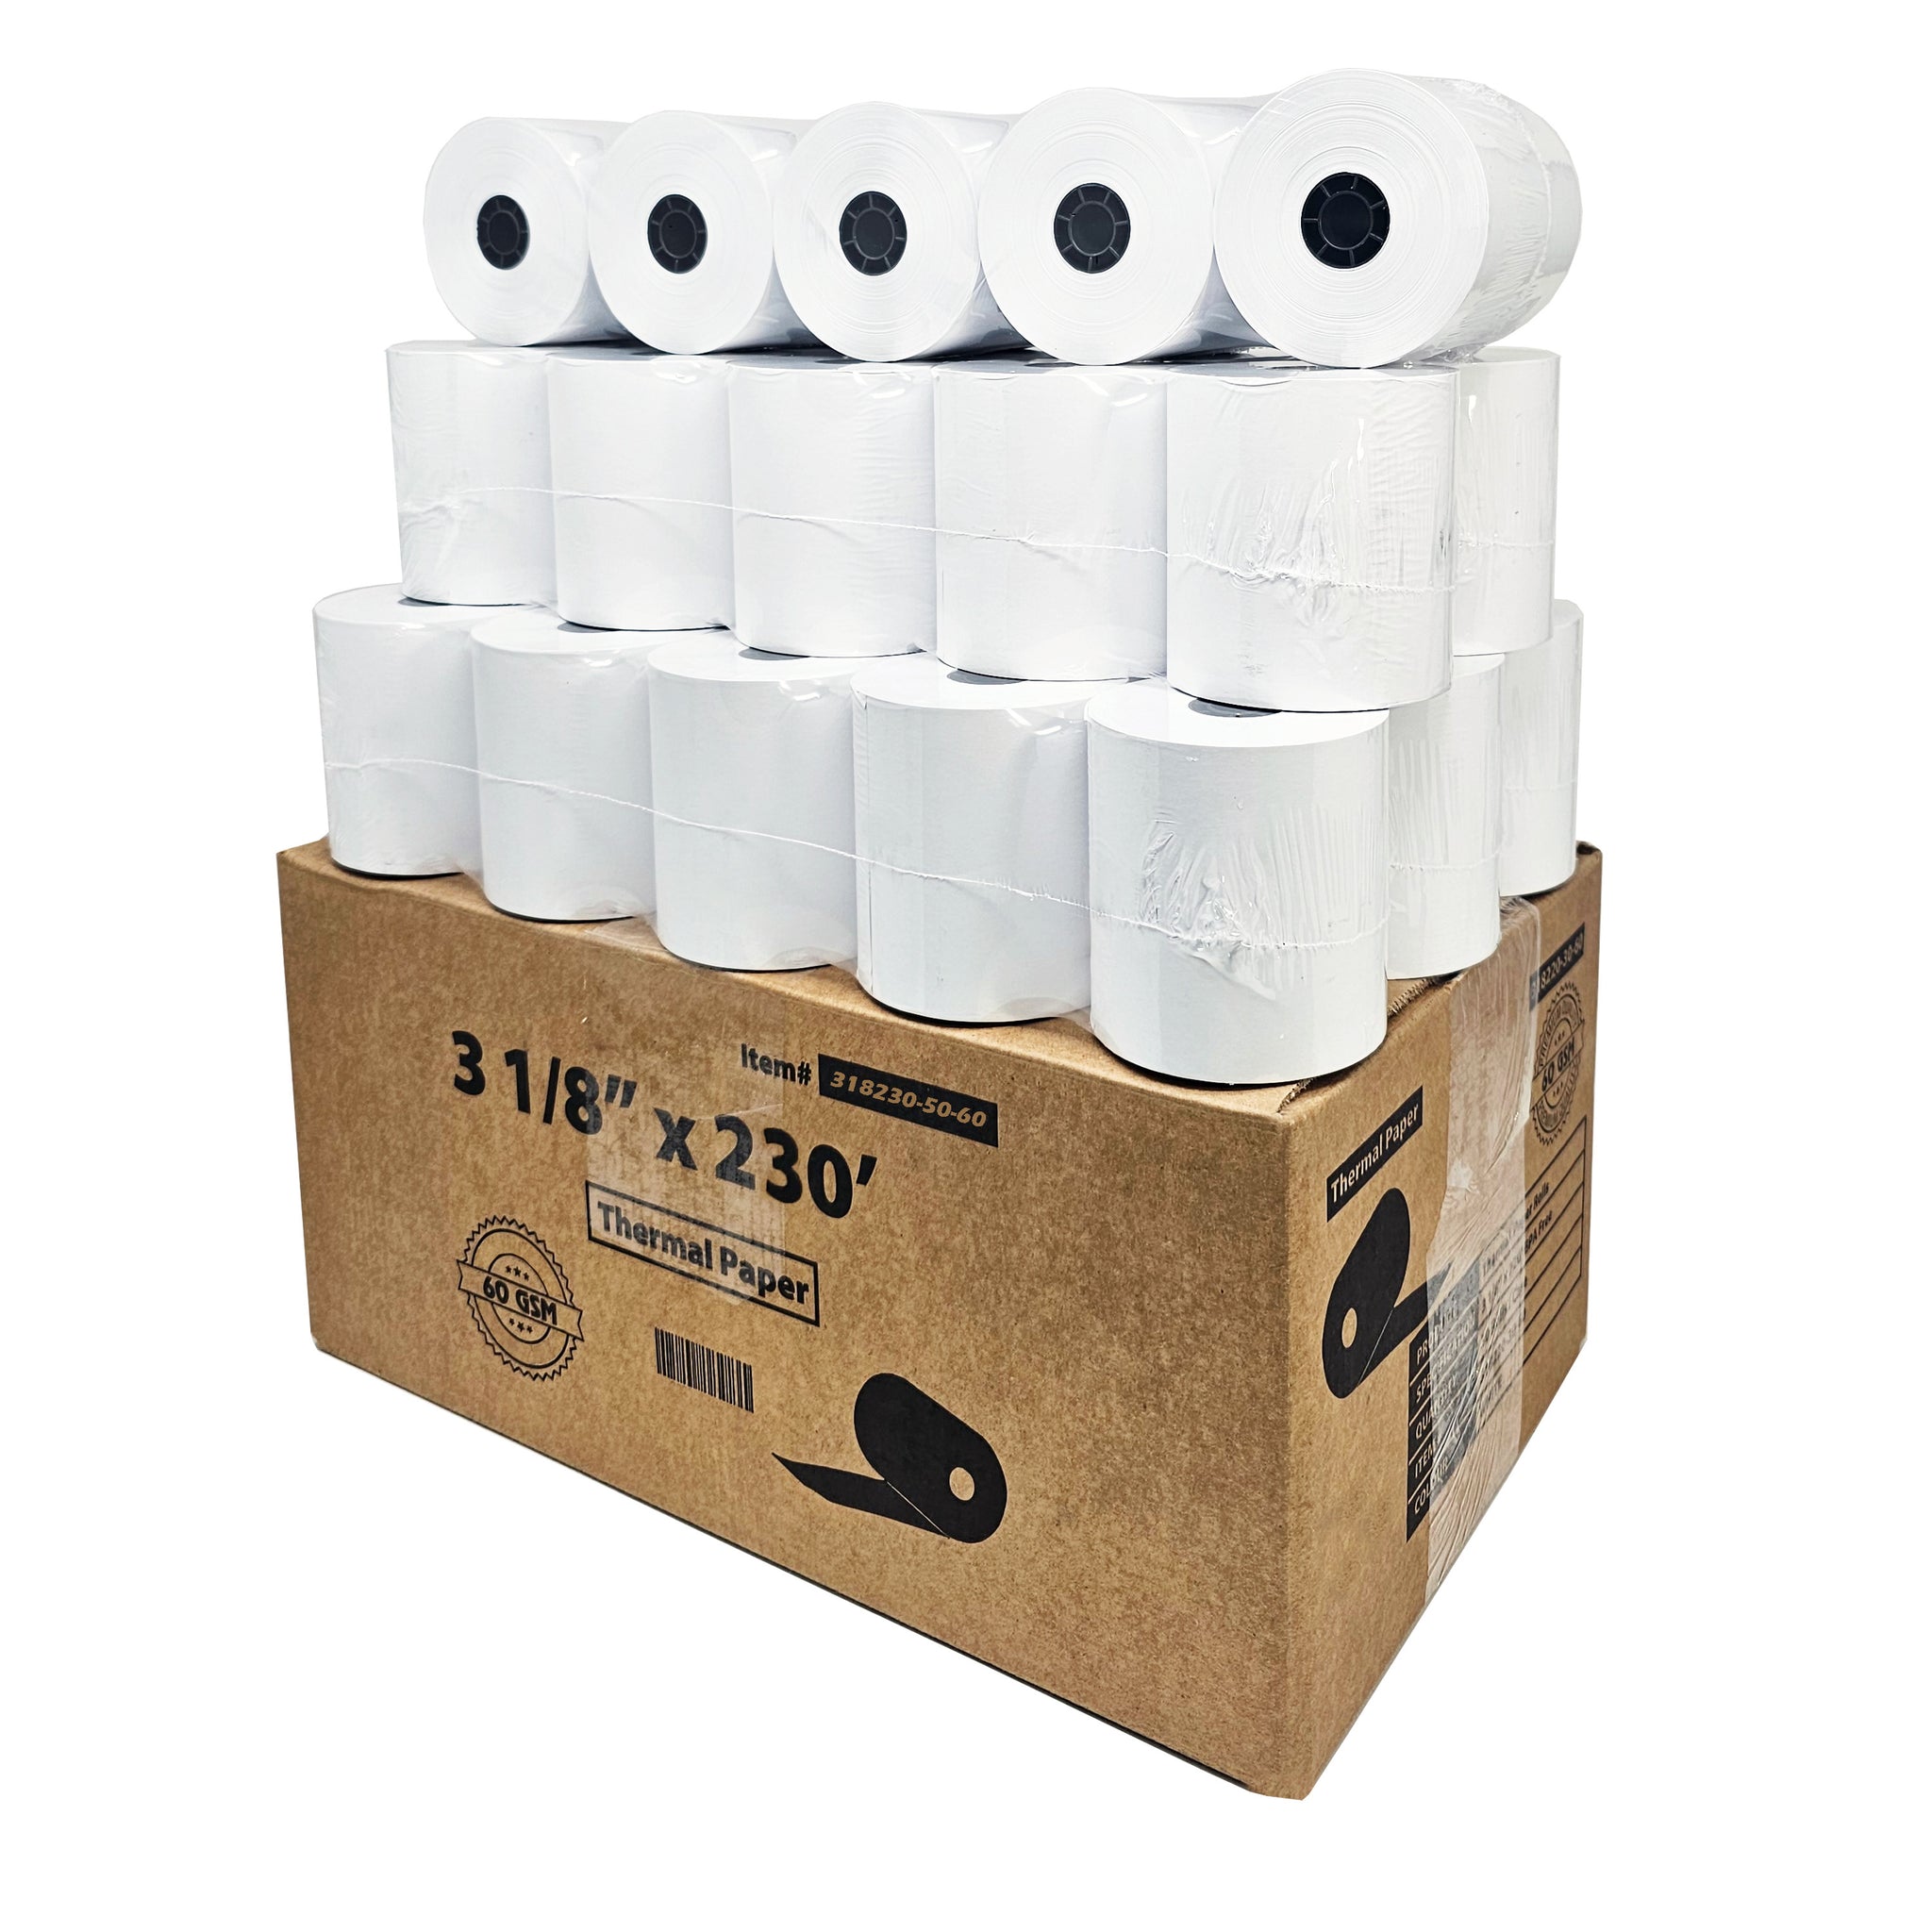 60 GSM Heavy Thermal Paper 3 1/8 x 230' thermal receipt paper (50 rolls - 60 GSM) Fits All POS Cash Registers Printers Clover Square Stations, Star Micronics SCP700, TSP100